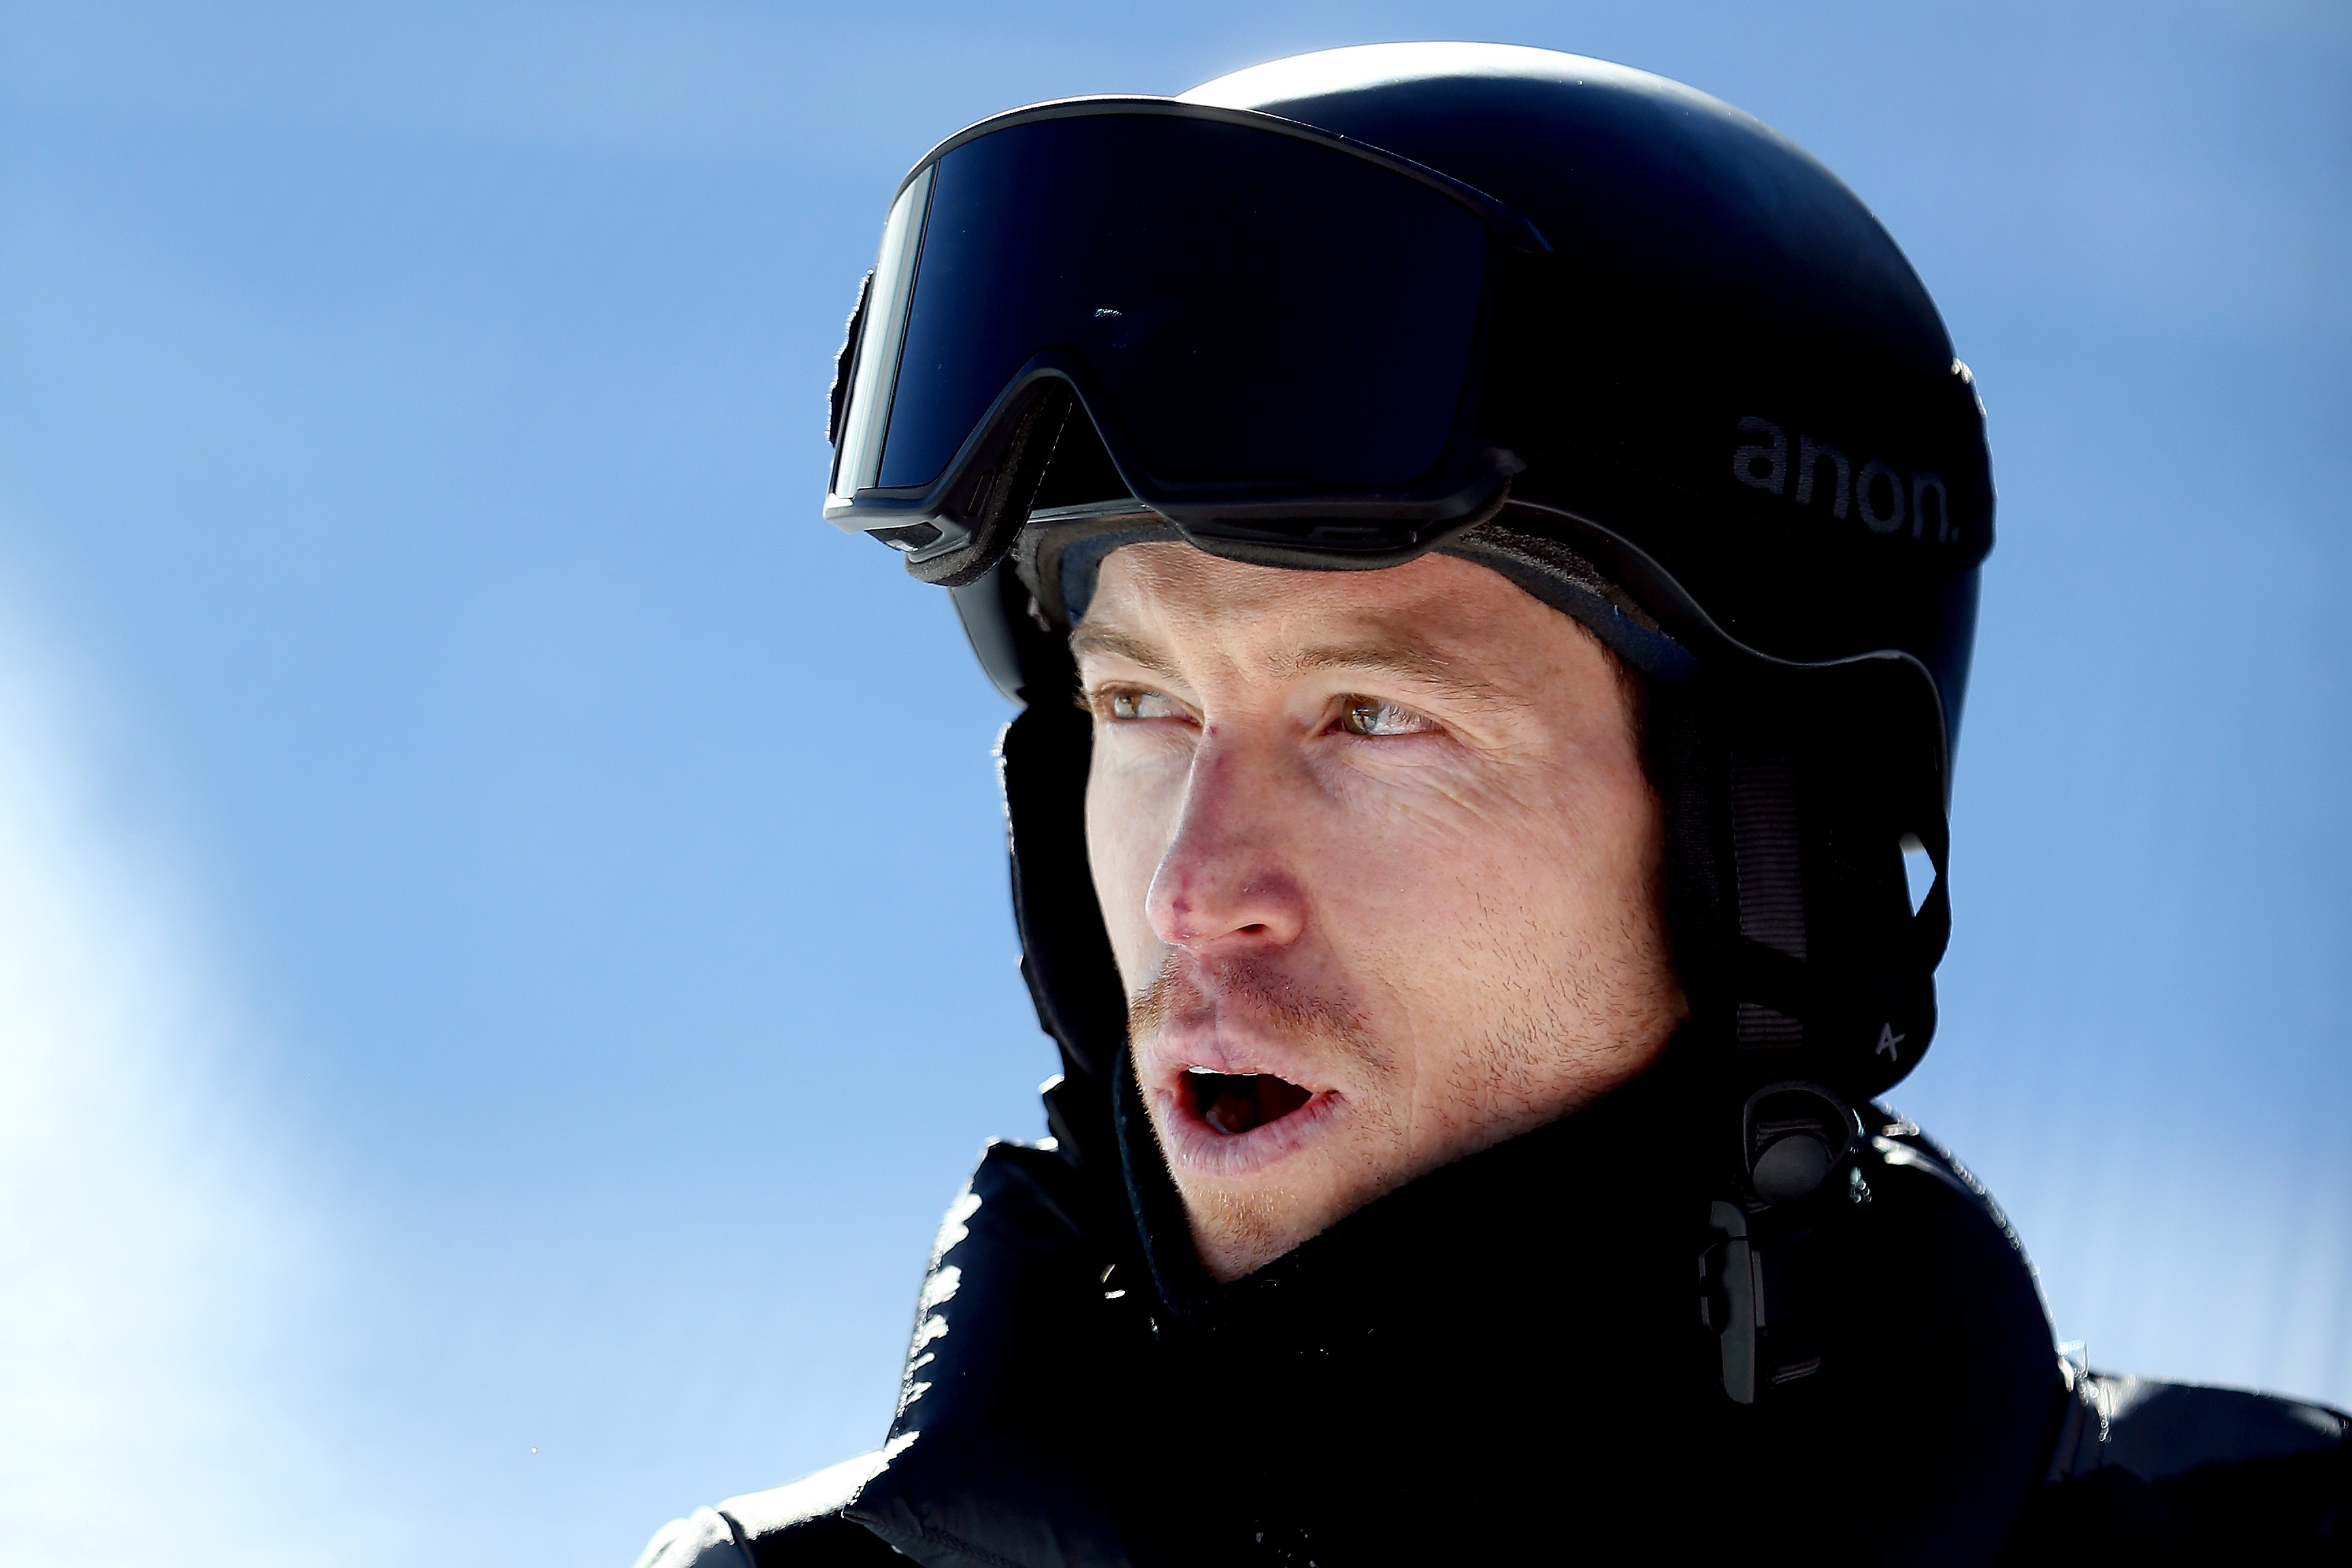 Video Shows Shaun White S Gruesome Crash That Resulted In